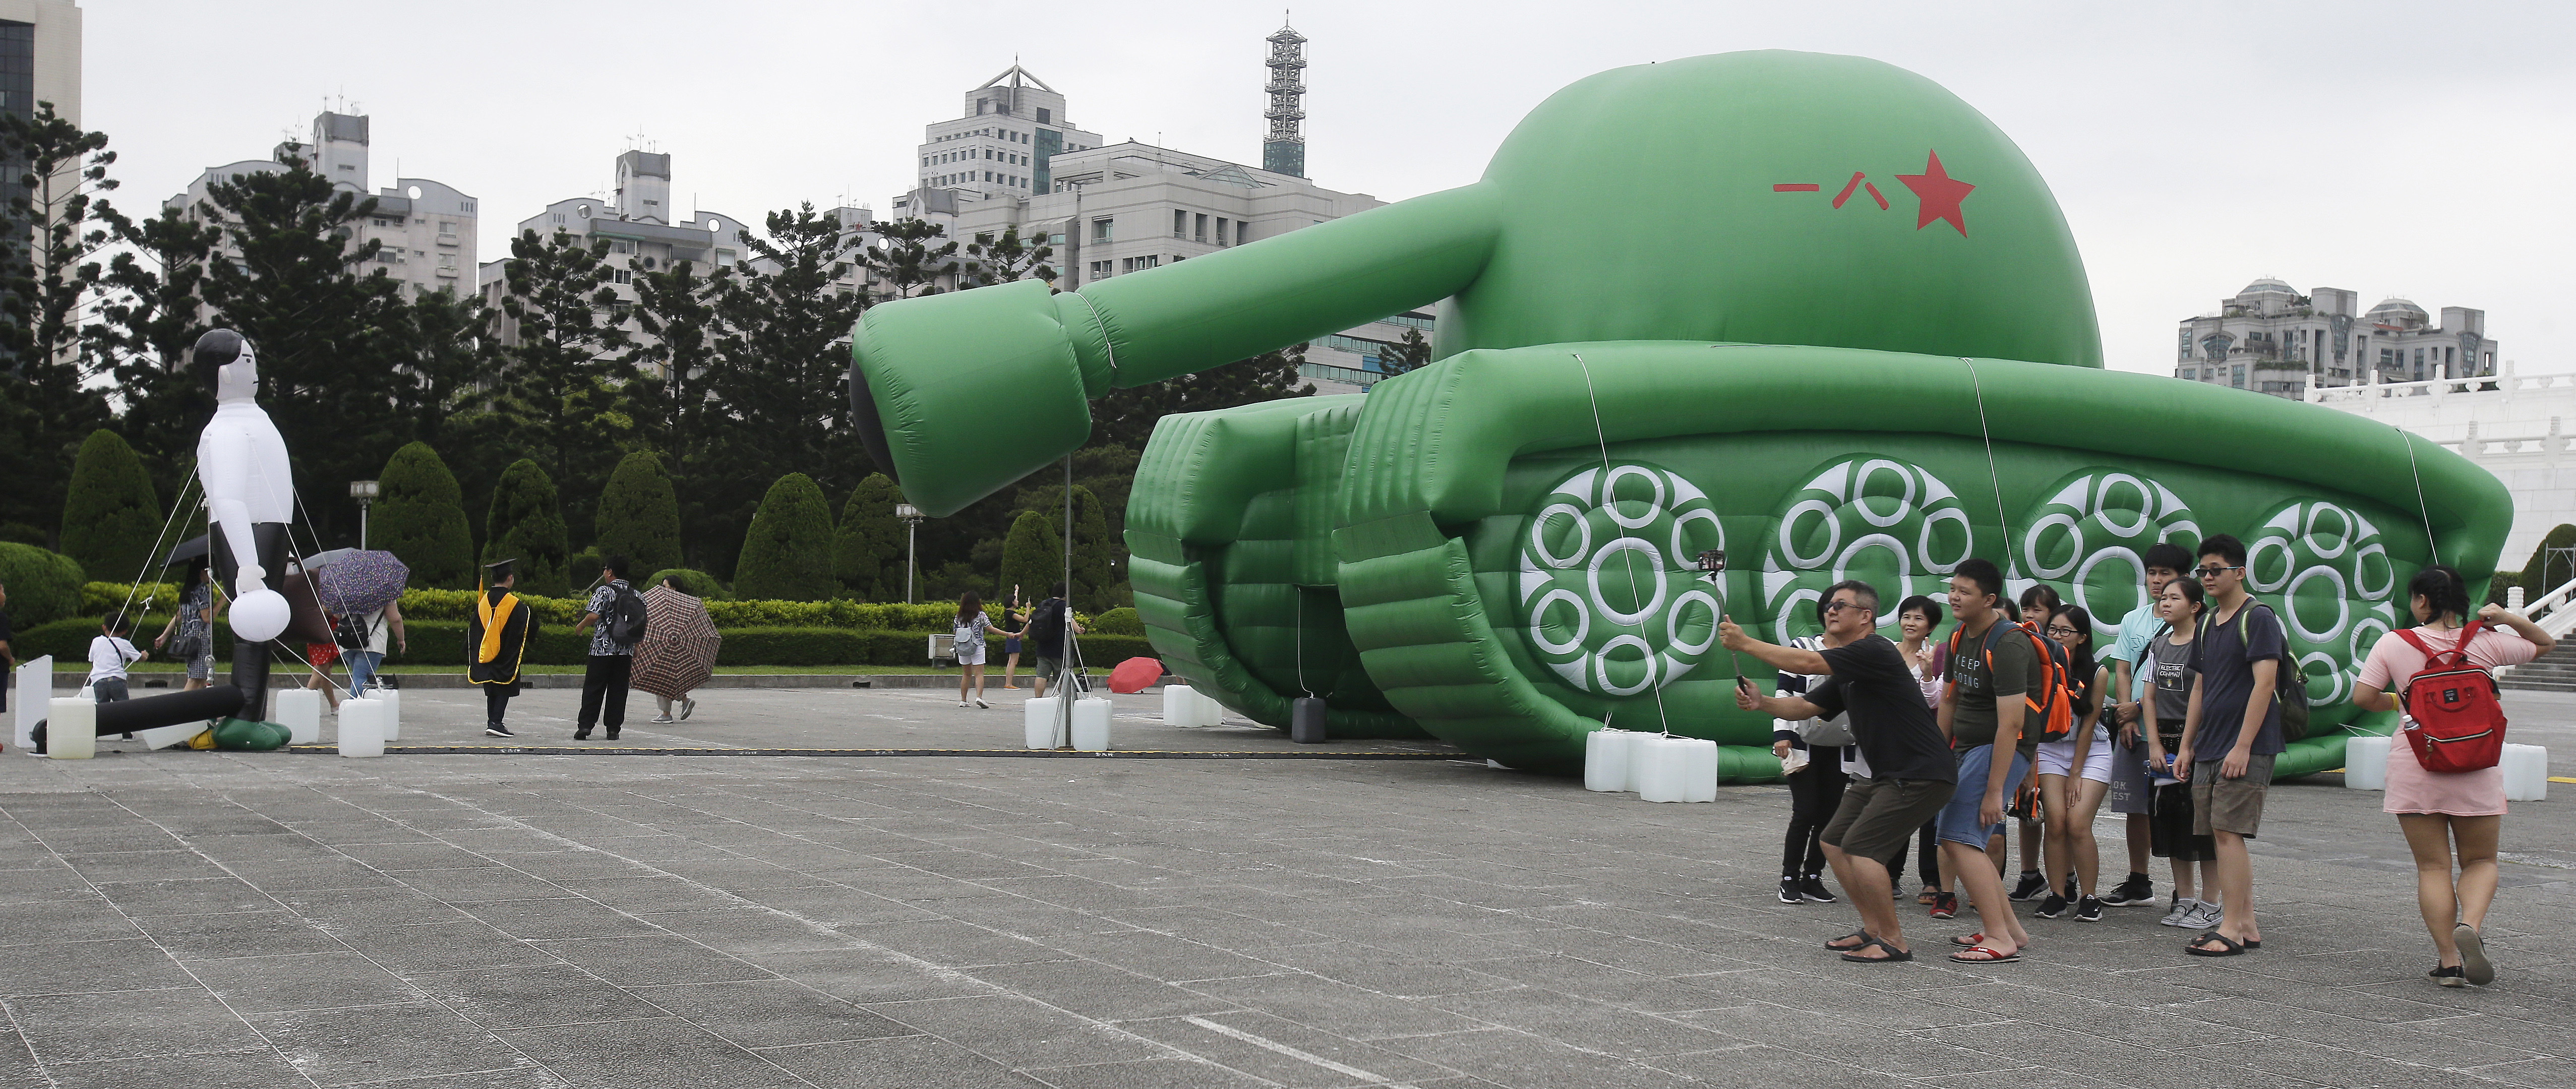 Chinese tourists take a selfie with an inflatable tank man at the Liberty Square of Chiang Kai-shek Memorial Hall in Taipei, Taiwan, Saturday, June 1, 2019. An artist erected the inflatable display in Taiwan’s capital to mark an iconic moment in the Tiananmen Square pro-democracy protests. The larger-than-life balloon installation, which stands in front of Taipei’s famous hall, portrays a peaceful encounter between a Chinese civilian and the military tanks that contributed to a brutal shutdown of the demonstrations in Beijing on June 4, 1989. (AP Photo/Chiang Ying-ying)